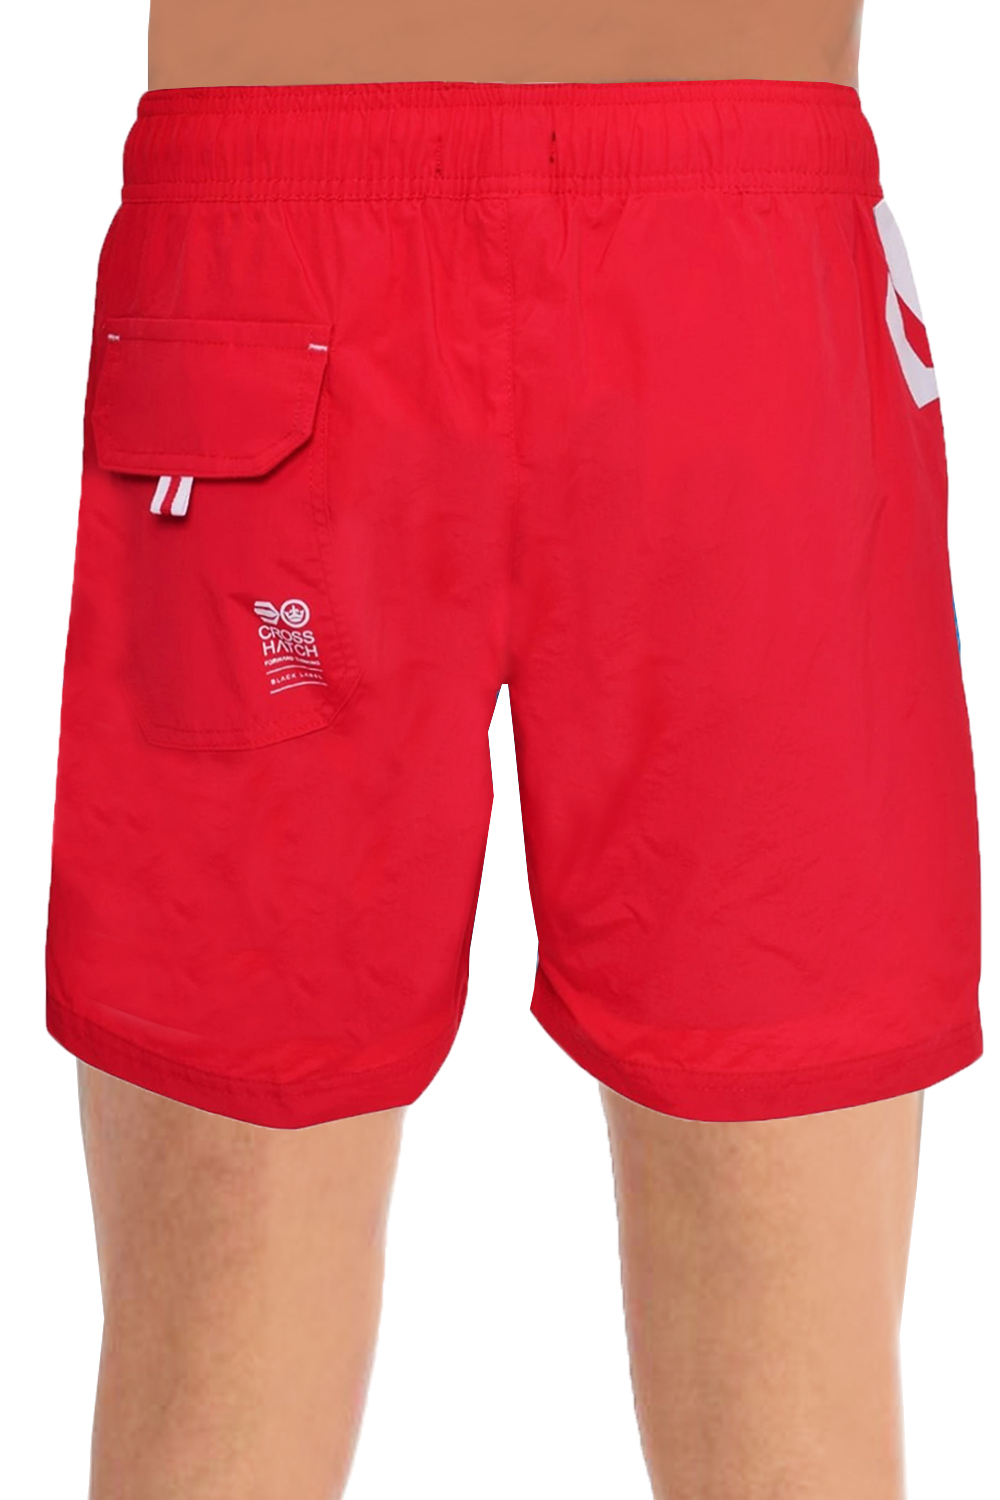 Crosshatch Mens Pacific High Red Swim Shorts Mesh Lined Swimming Trunks ...